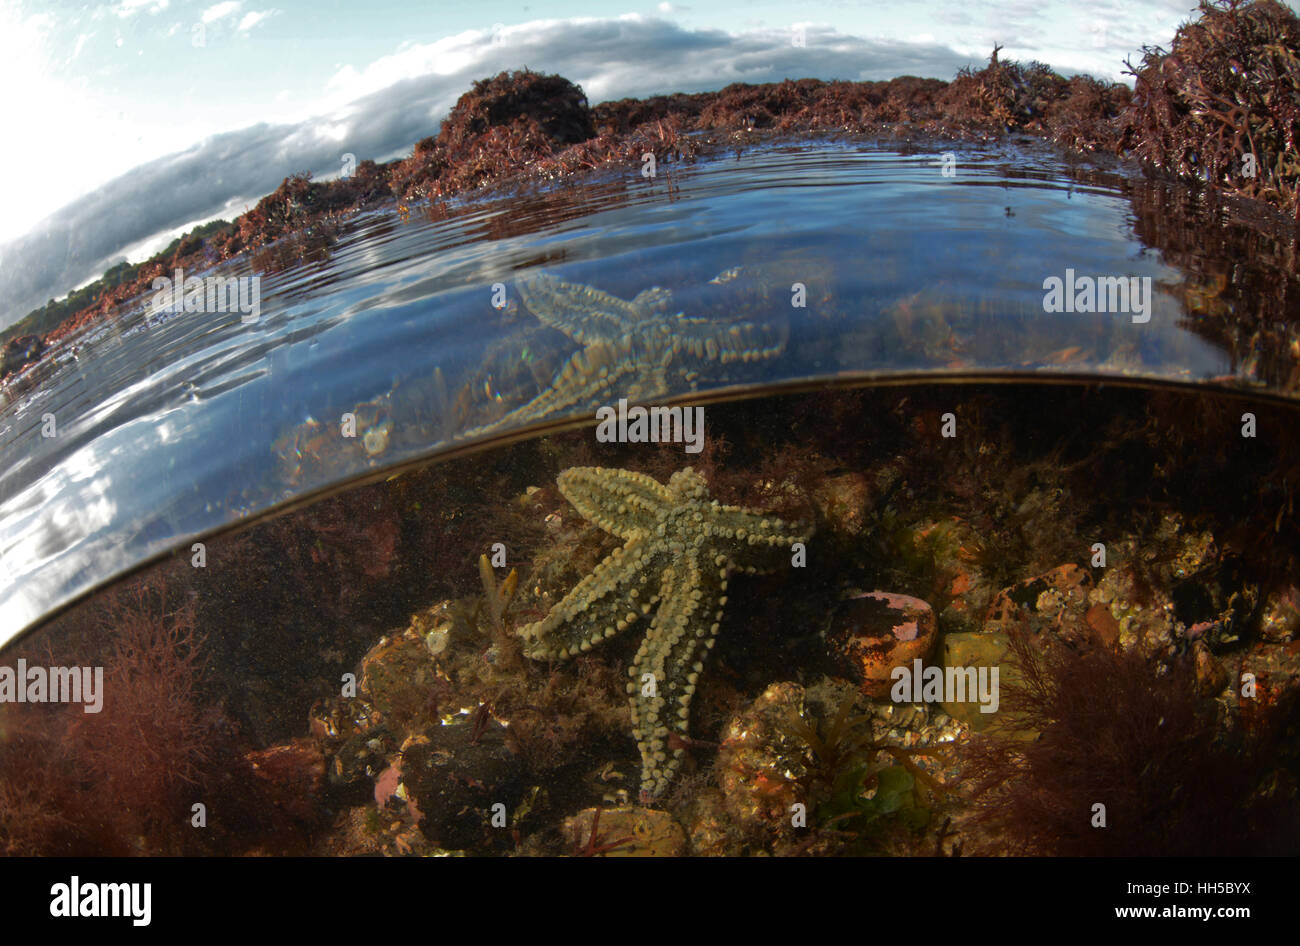 Spiny starfish in a rock pool at Hafan Y Mor, Pwllheli, North Wales Stock Photo